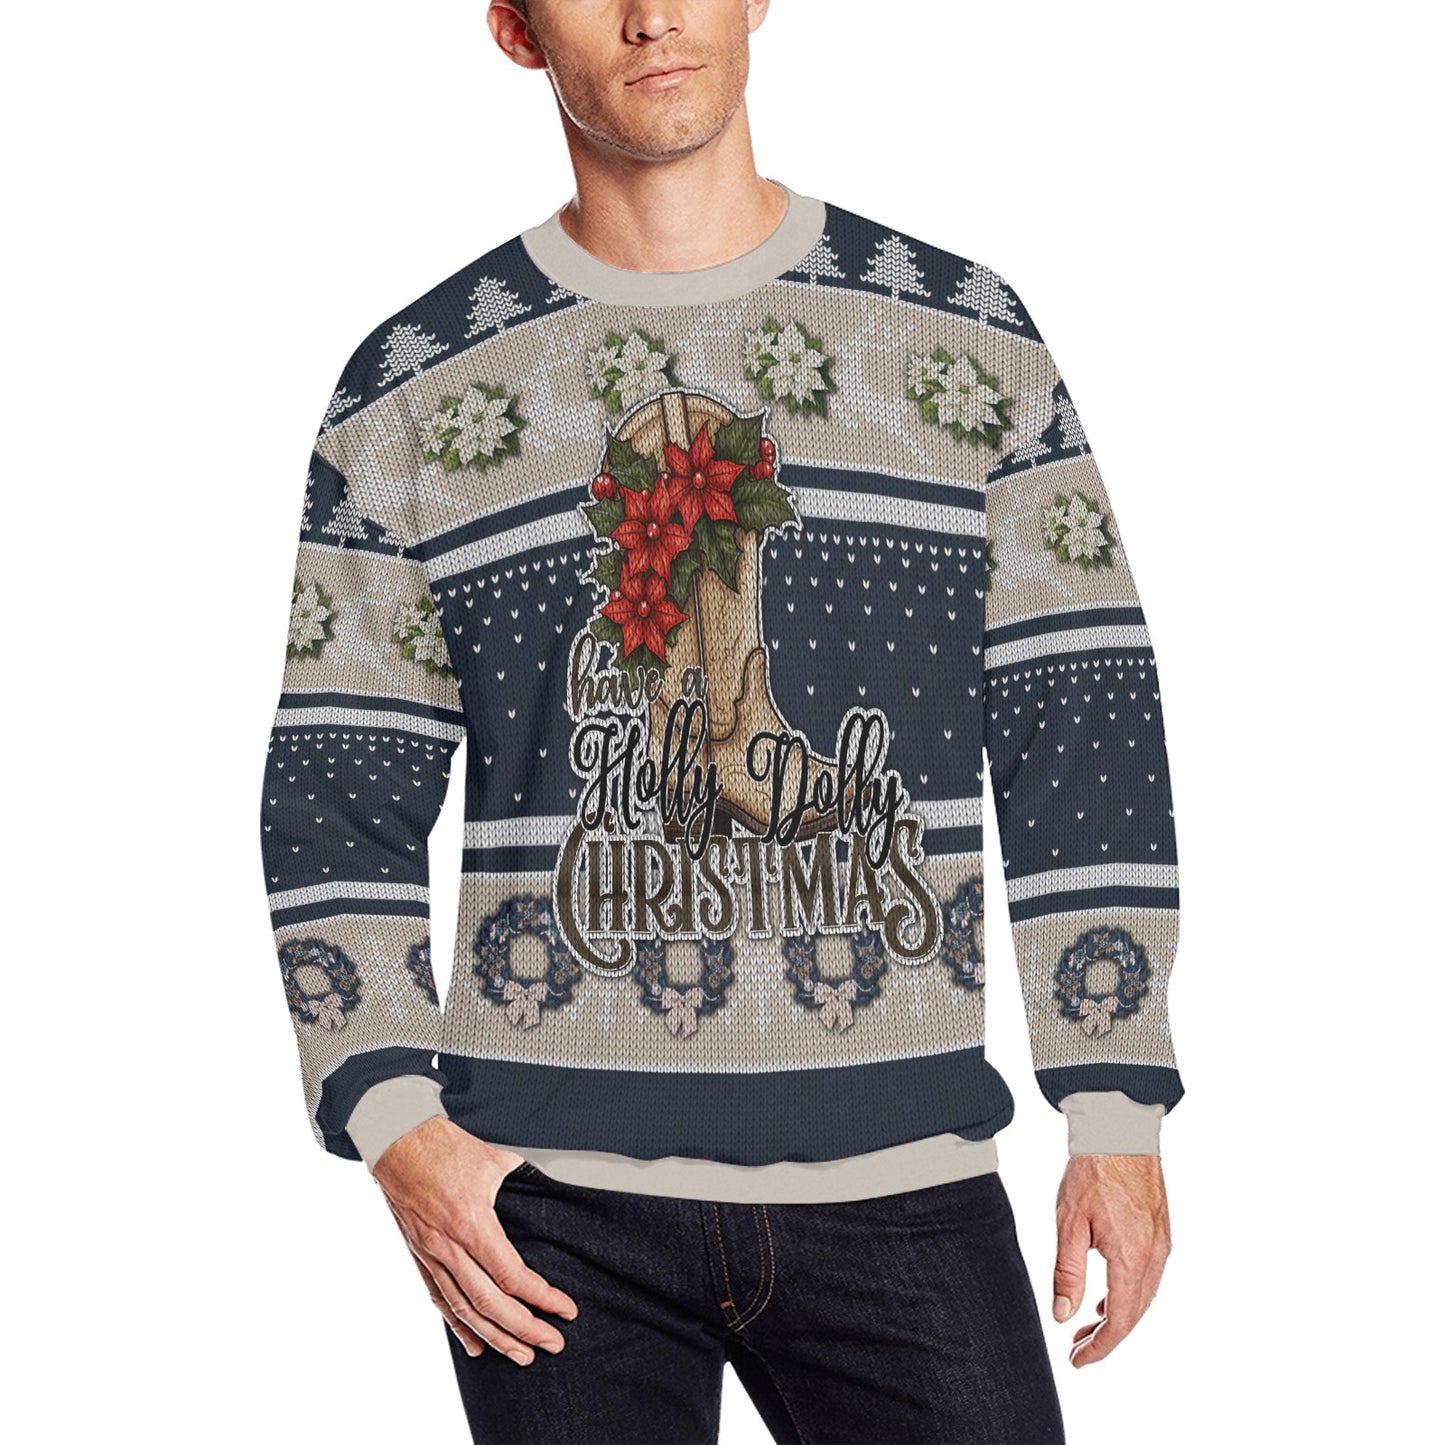 Have a Holly Dolly Christmas-Blue & Tan All Over Print Crewneck Sweatshirt Virtuous Delights Studio